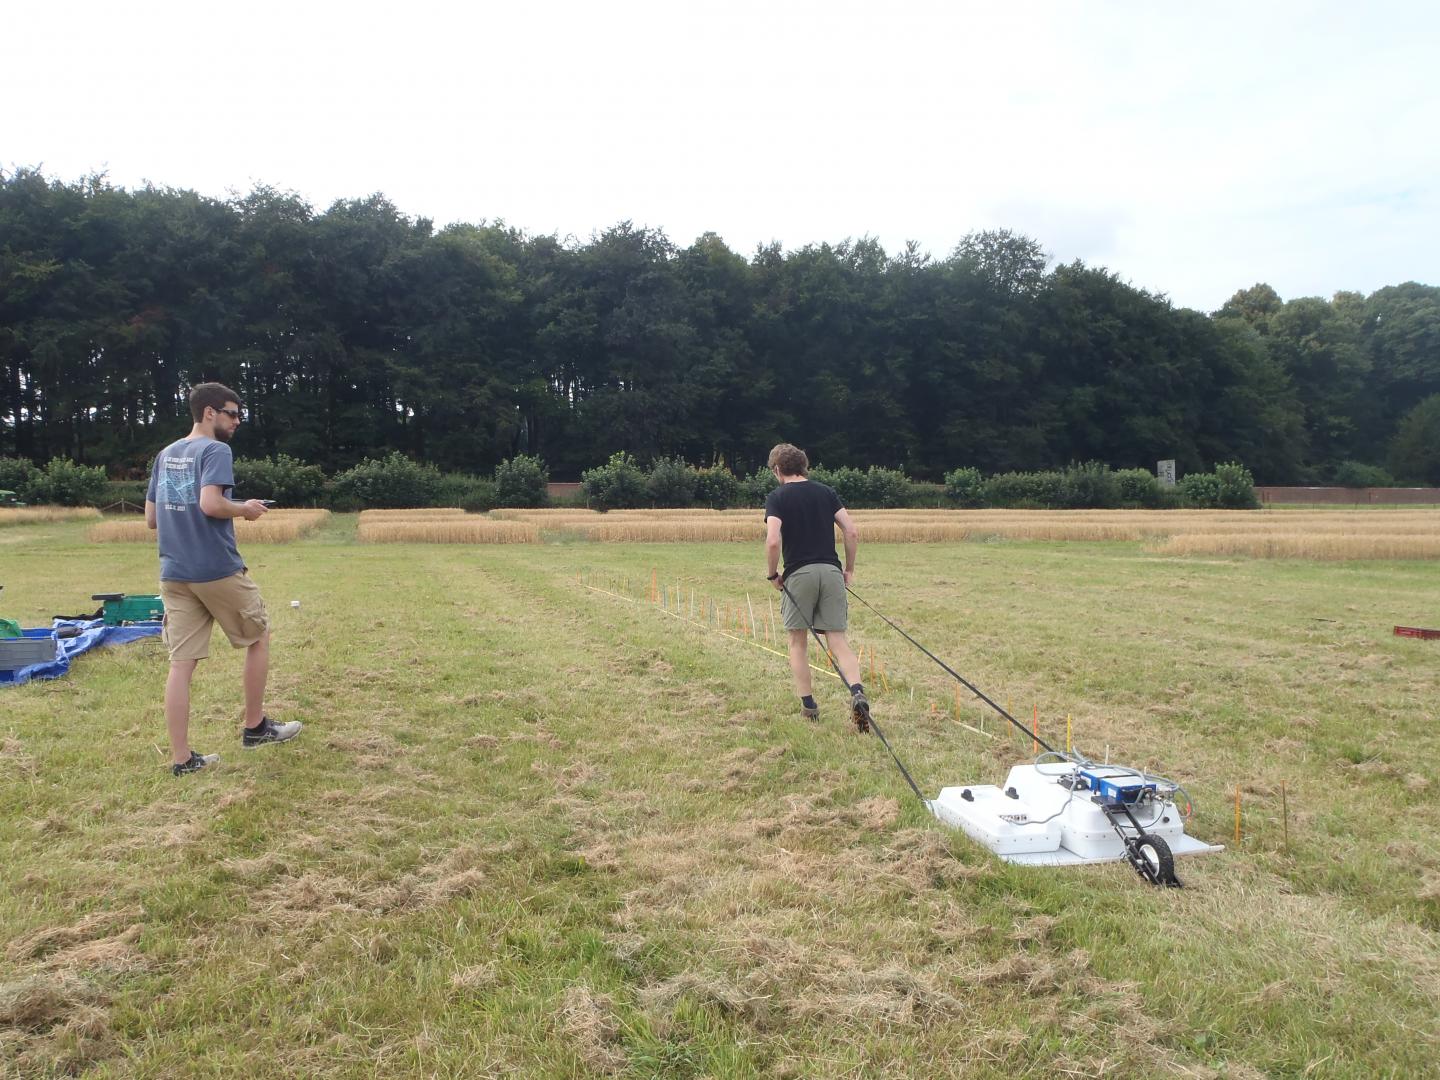 Algeo stands on the left with a tablet while his advisor, Lee Slater, drags ground penetrating radar equipment over the soil's surface. Source: Chris Watts, Rothamsted Research